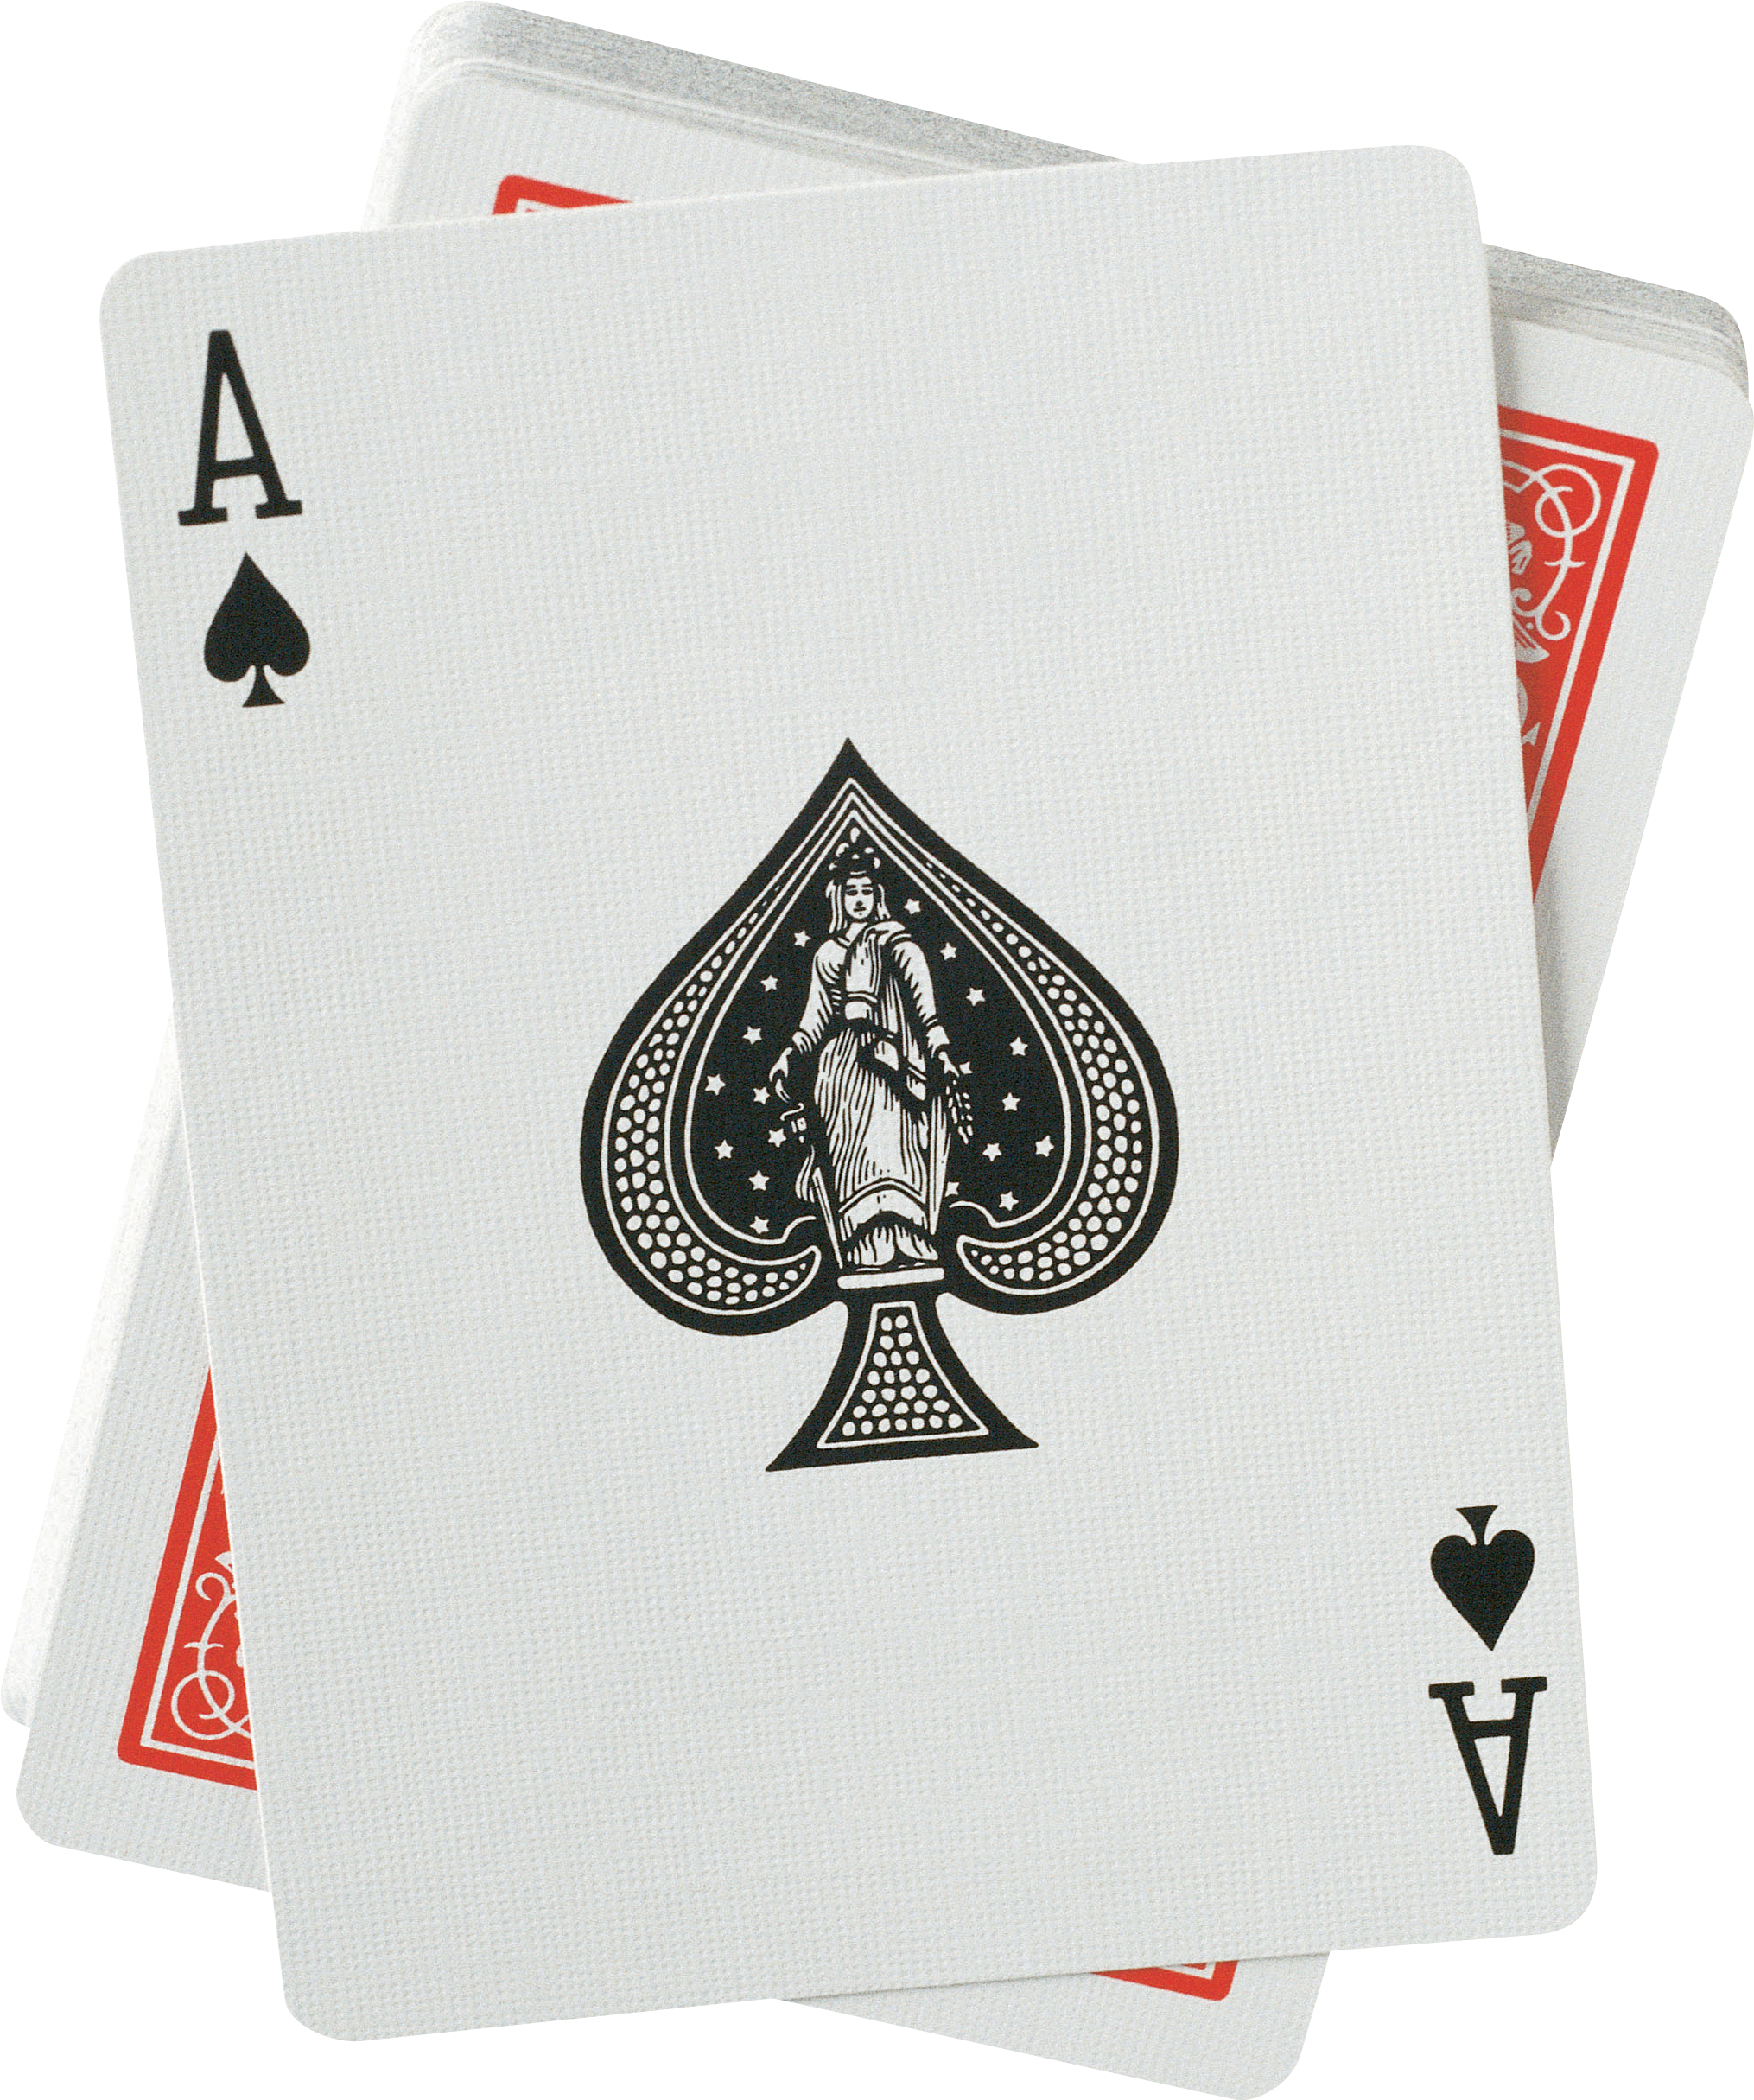 Cards PNG images Download 